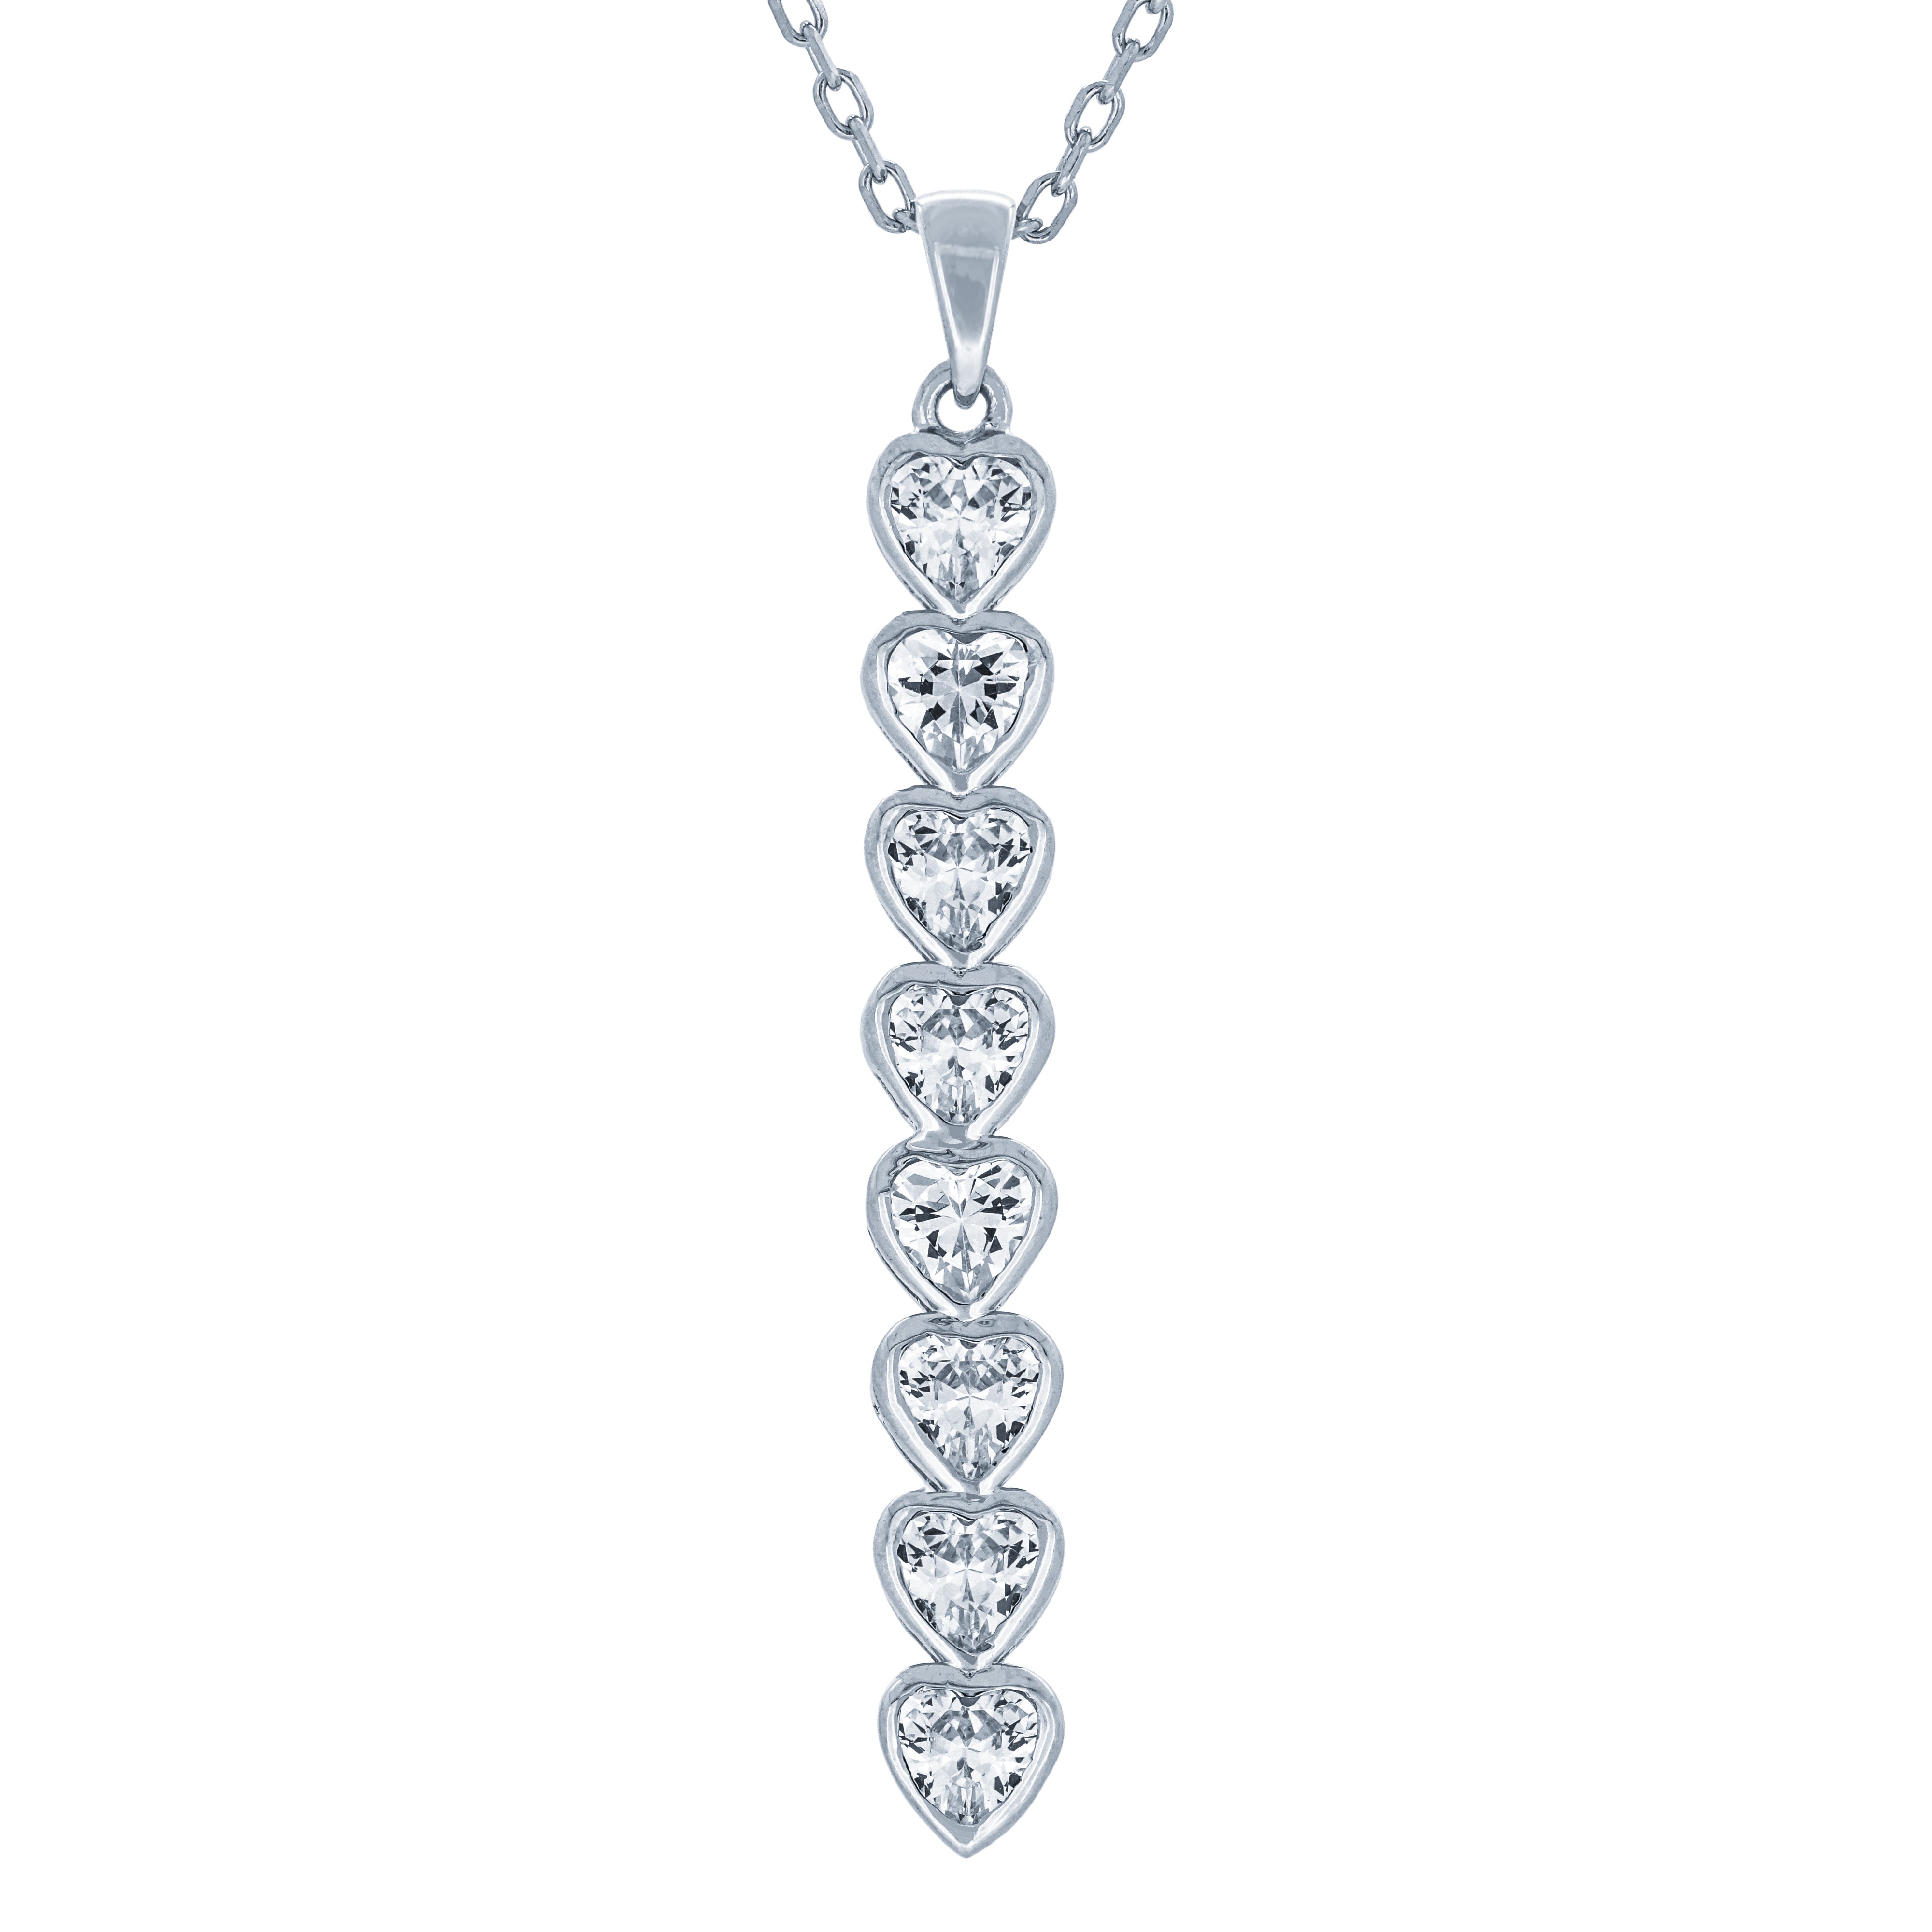 (100063) White Cubic Zirconia Pendant Necklace In Sterling Silver